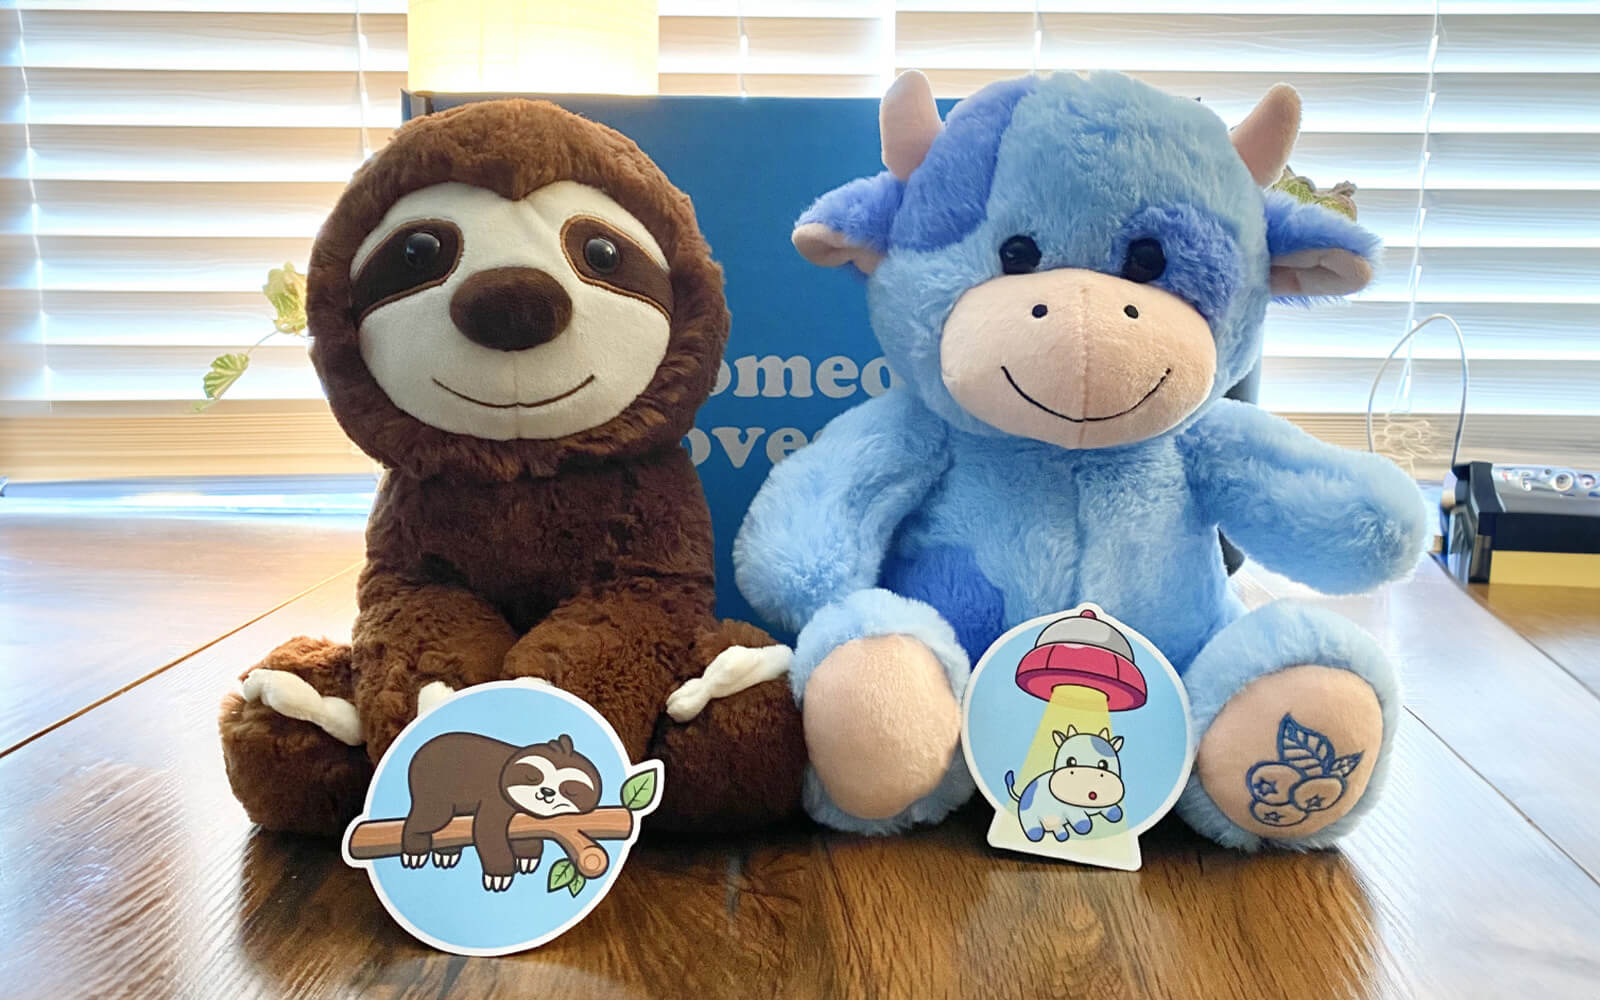 sloth and blue cow stuffed animal sitting on table with matching stickers